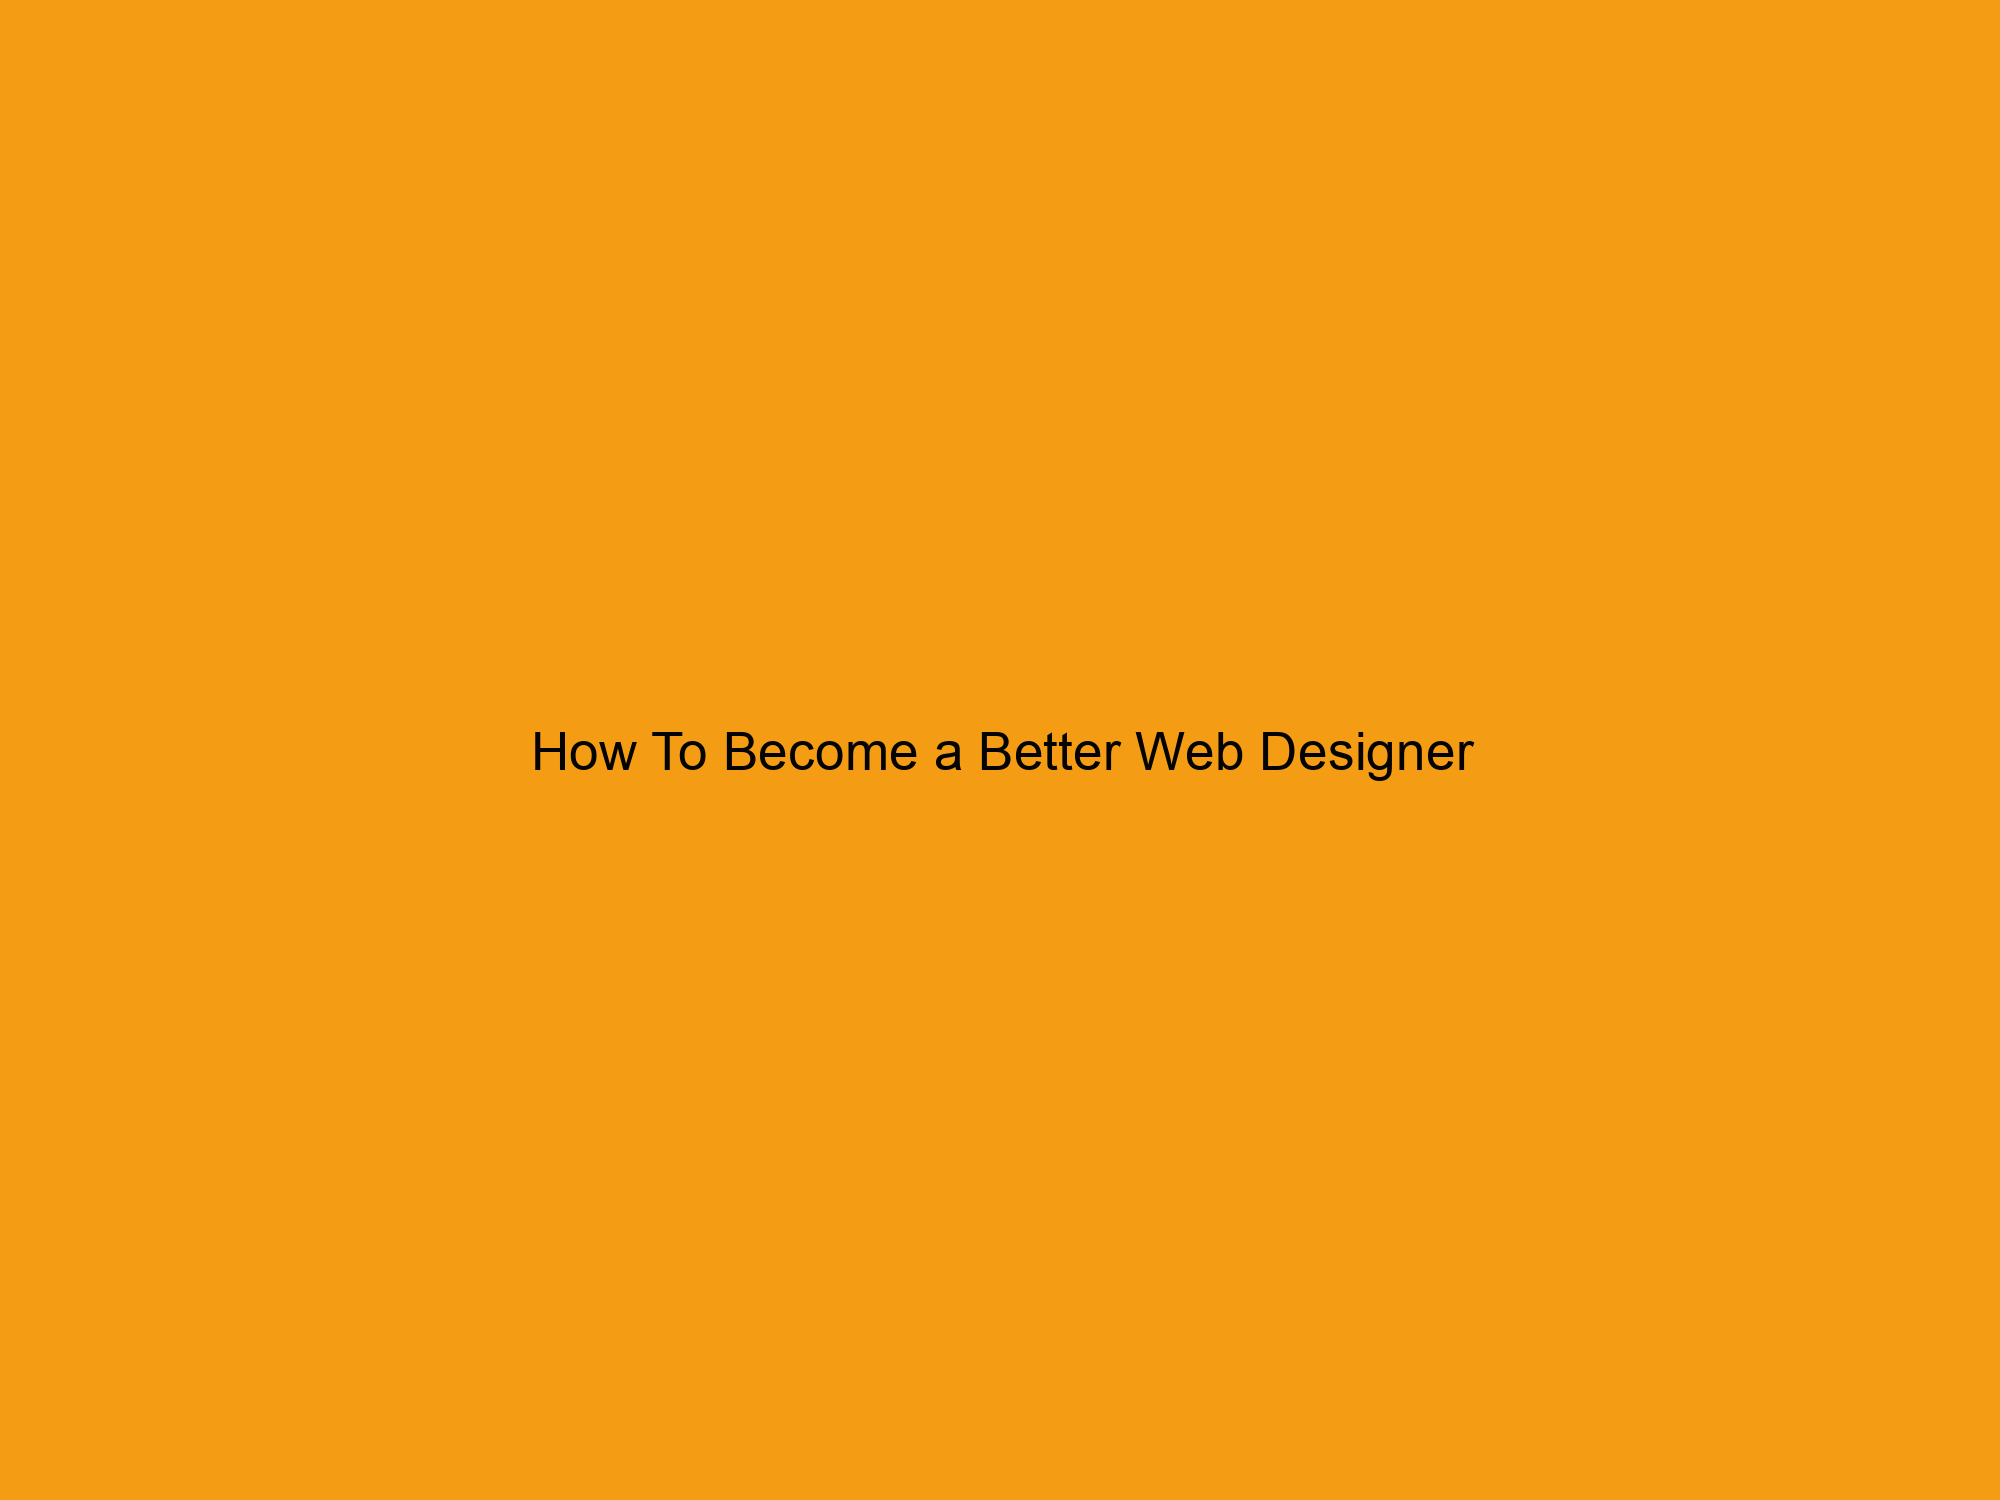 How To Become a Better Web Designer